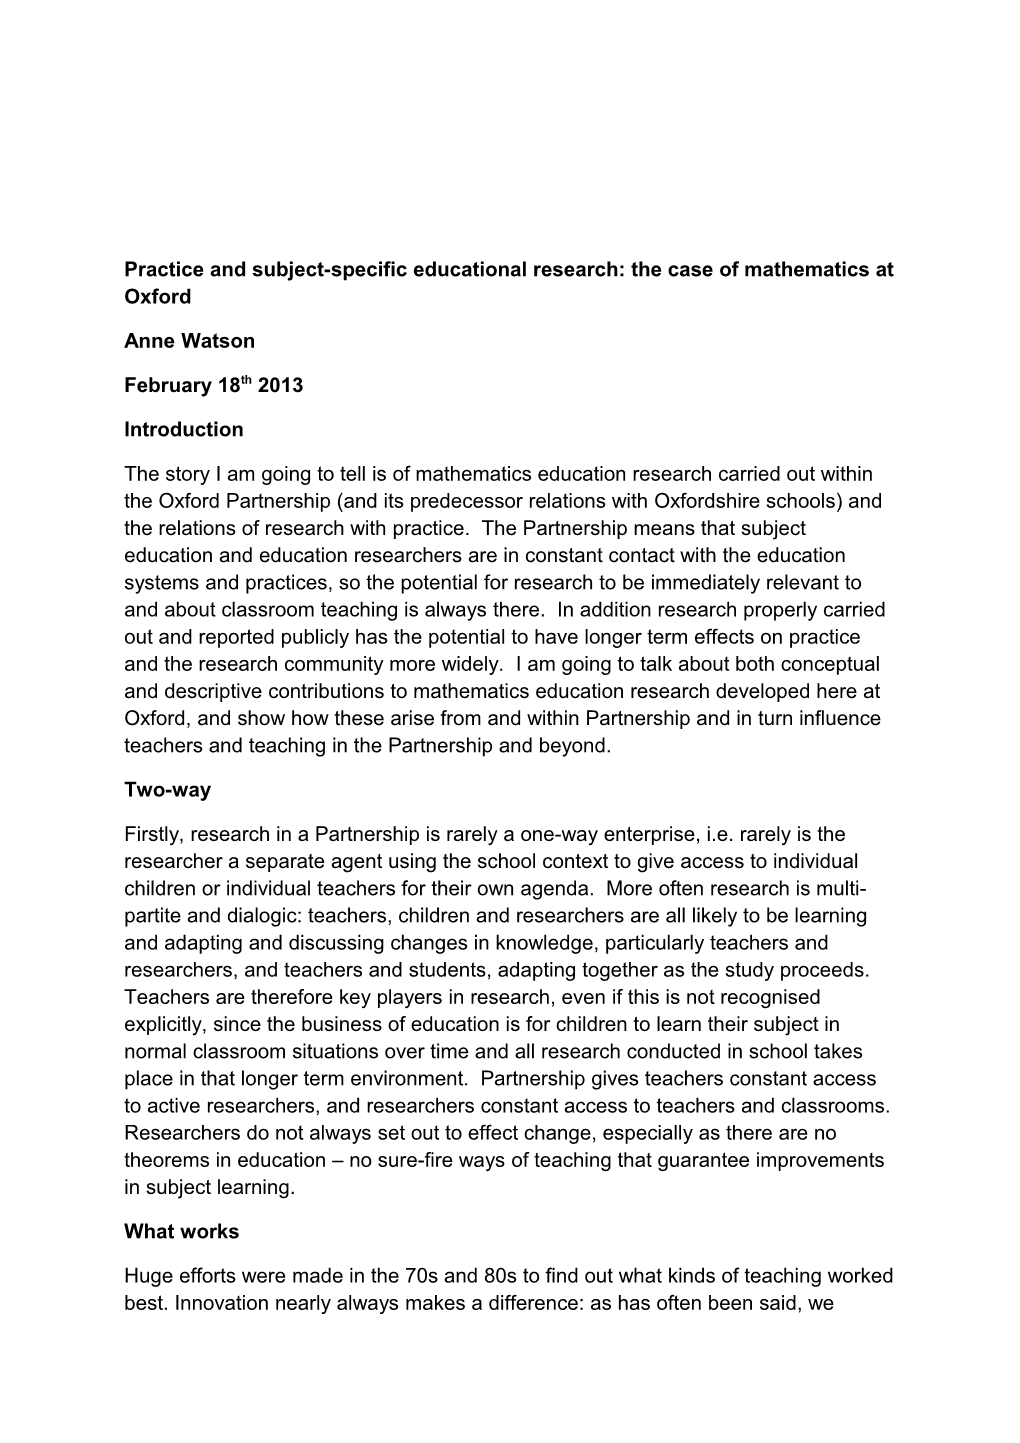 Practice and Subject-Specific Educational Research: the Case of Mathematics at Oxford